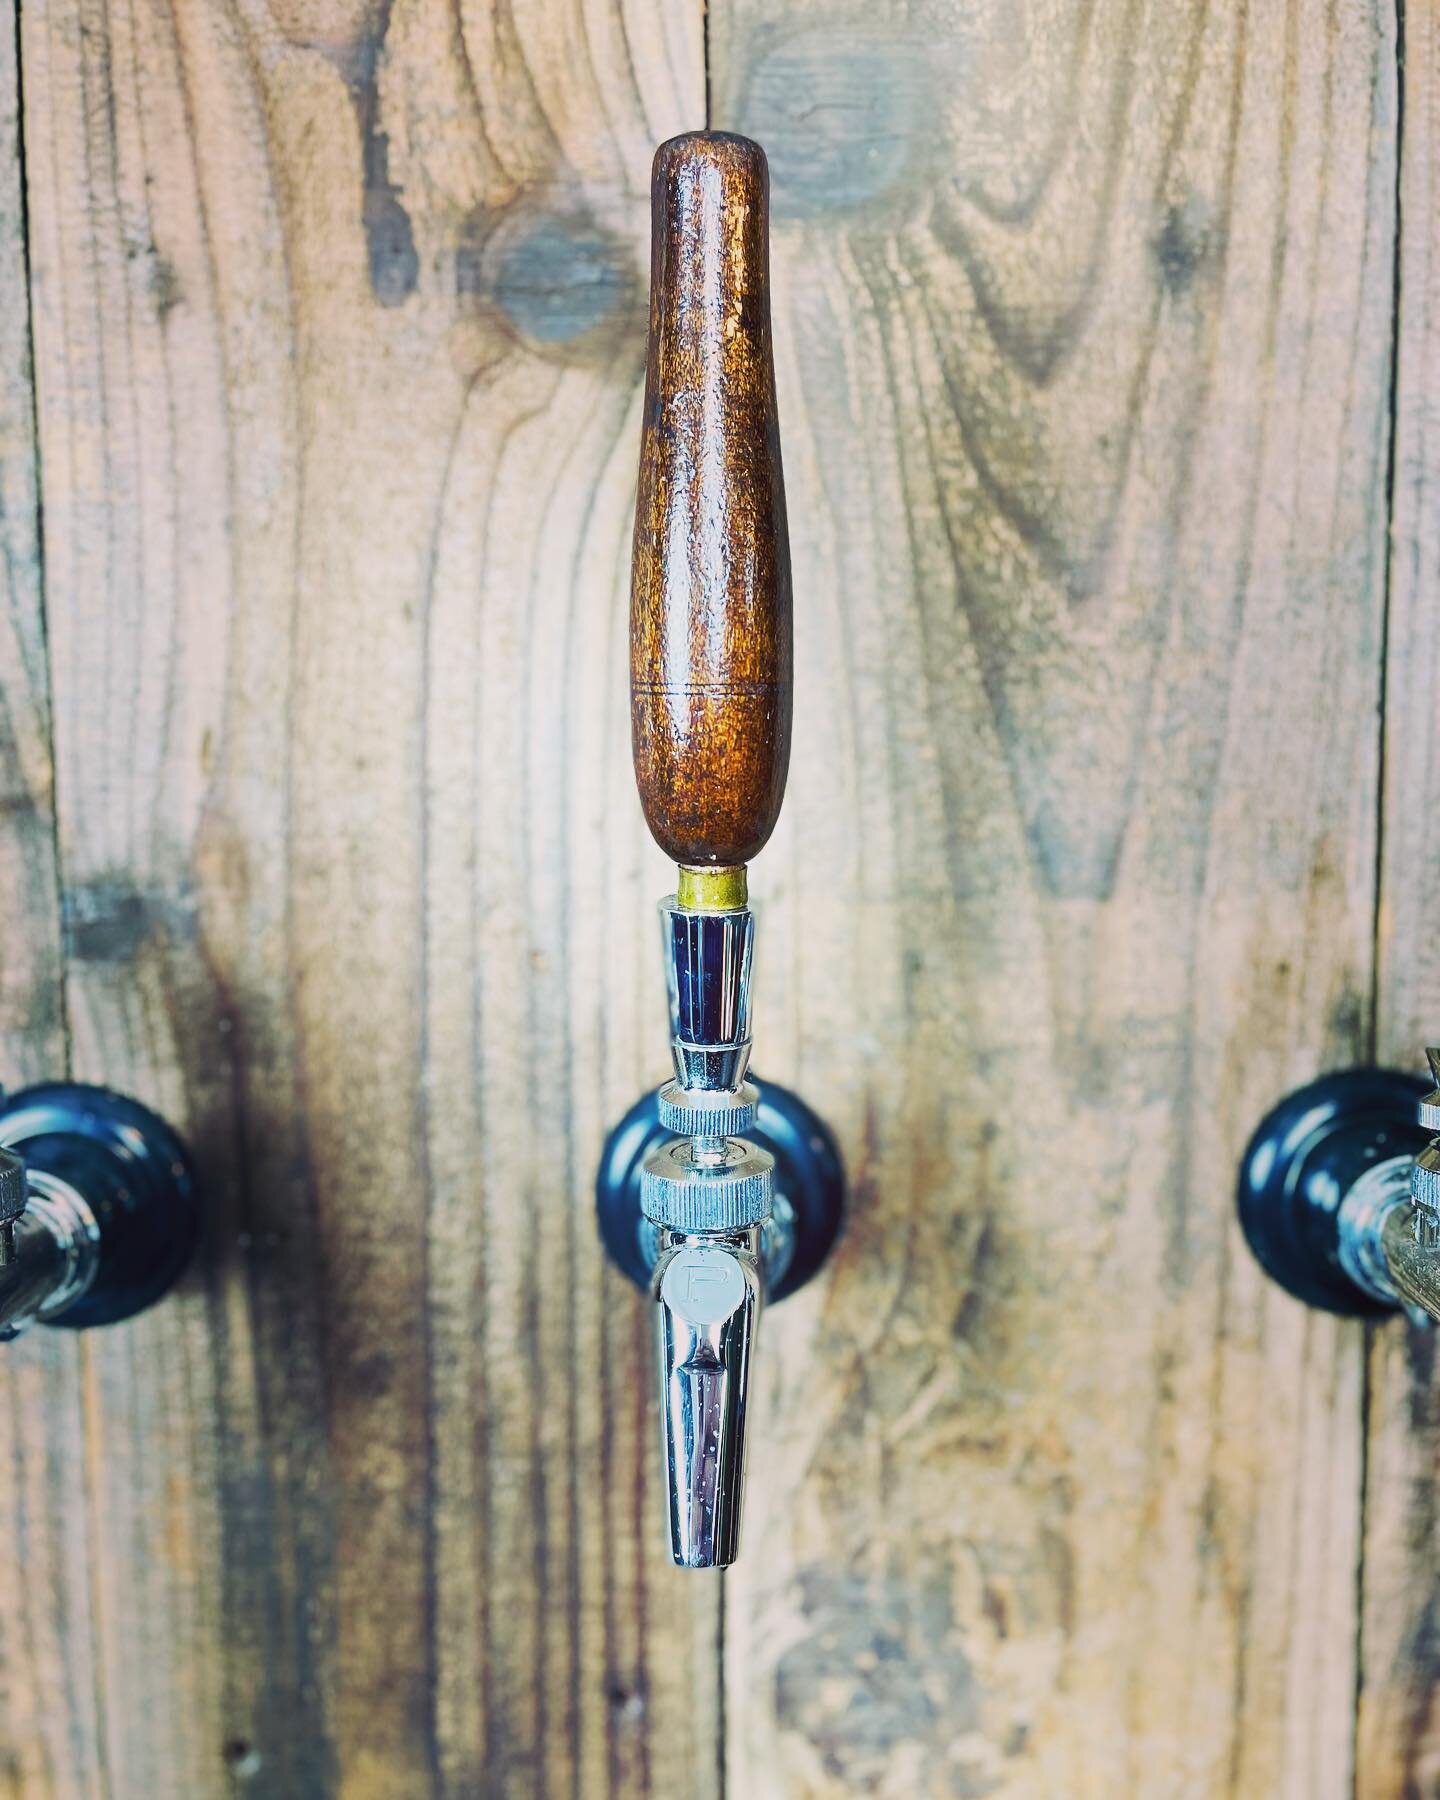 Vintage tool tap handles at TroubleHouse.org!!